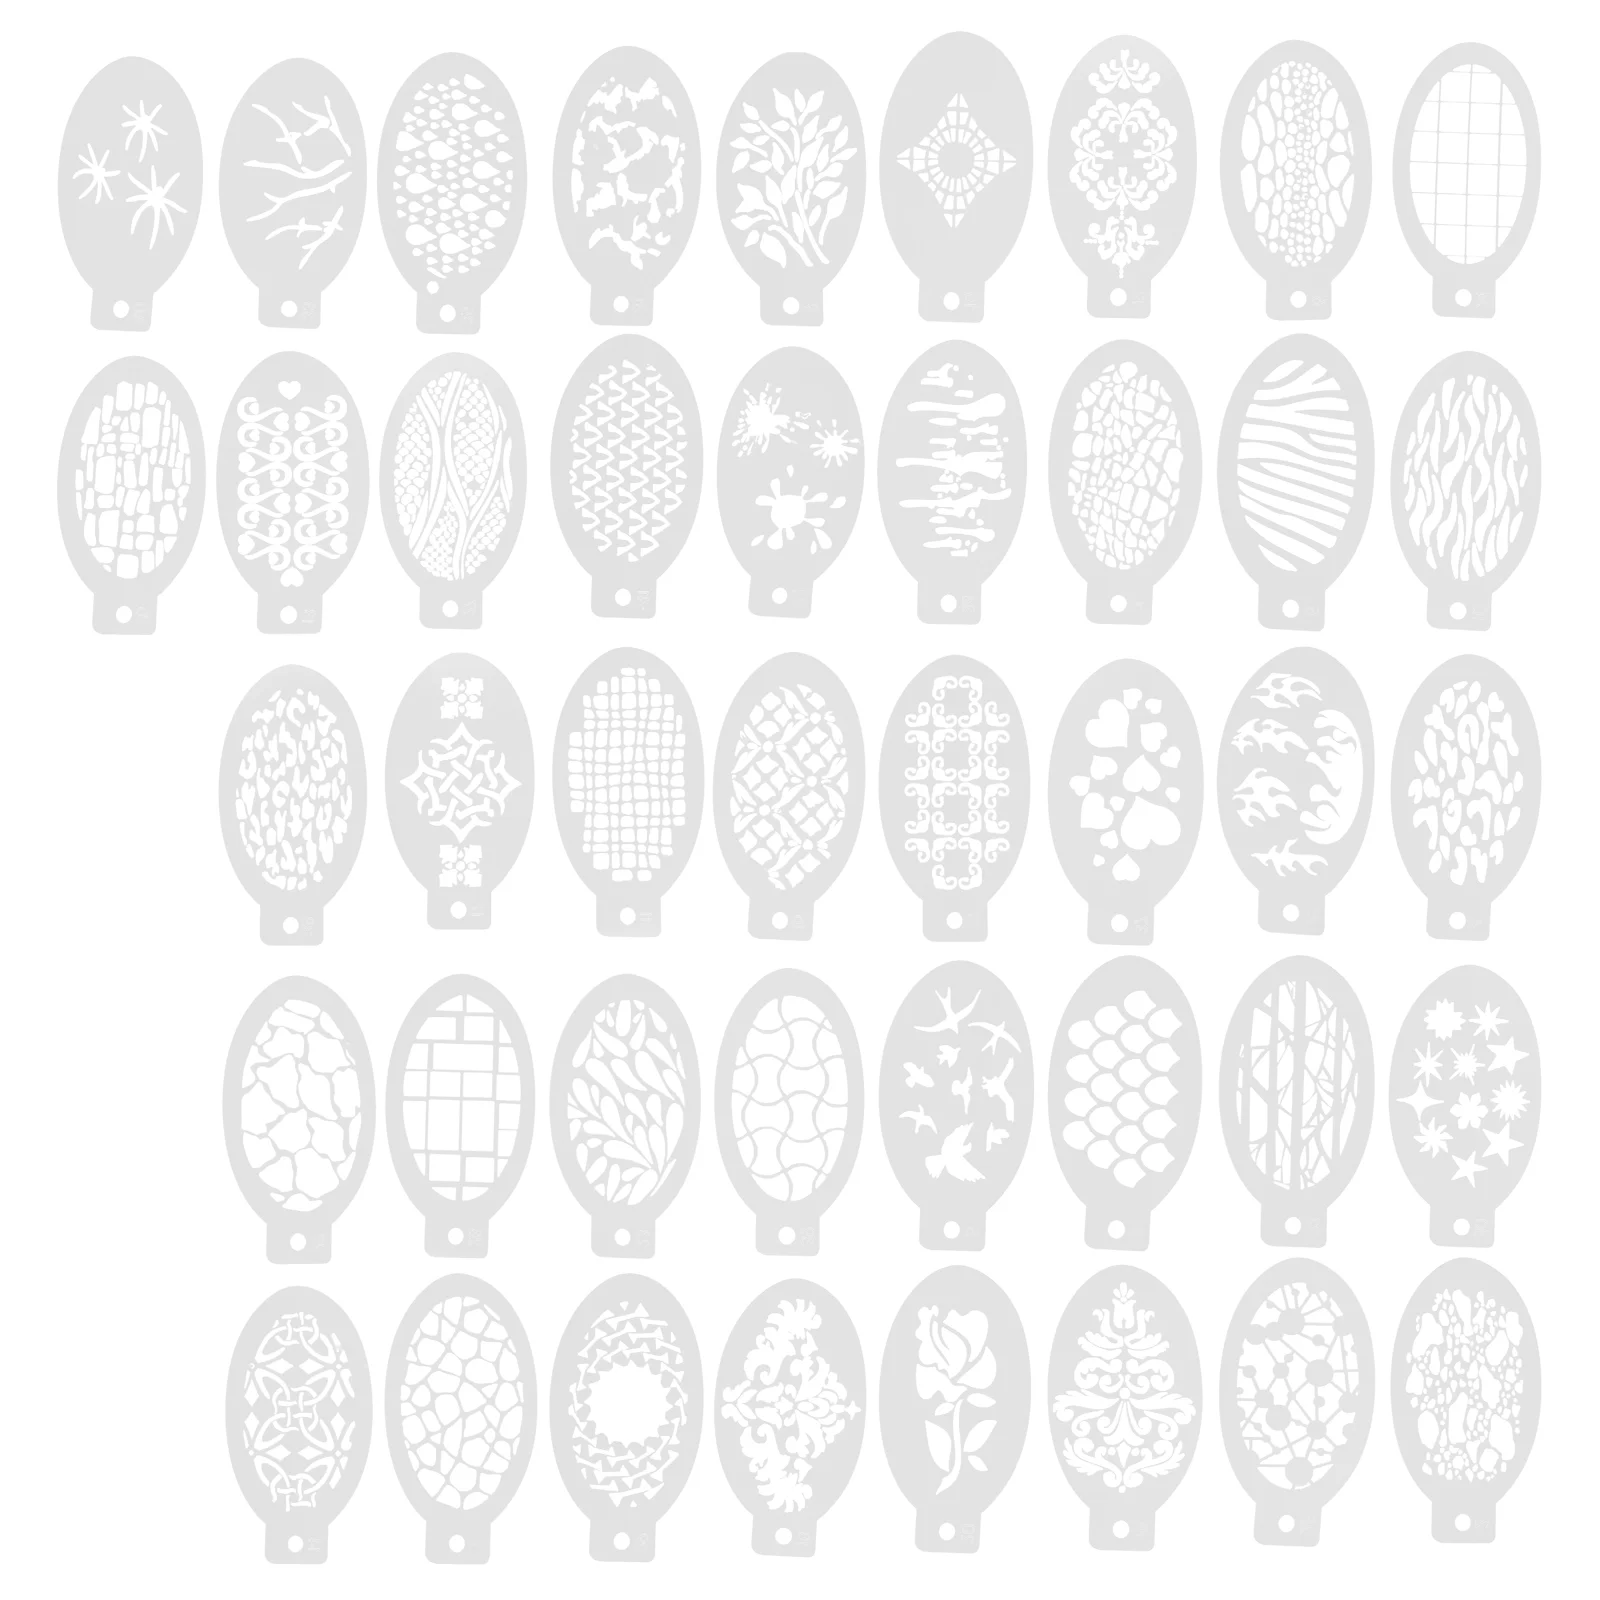 42 Pcs Painted Template Body Drawing Stencil Face Painting Supplies Makeup Tools Stencils Facial